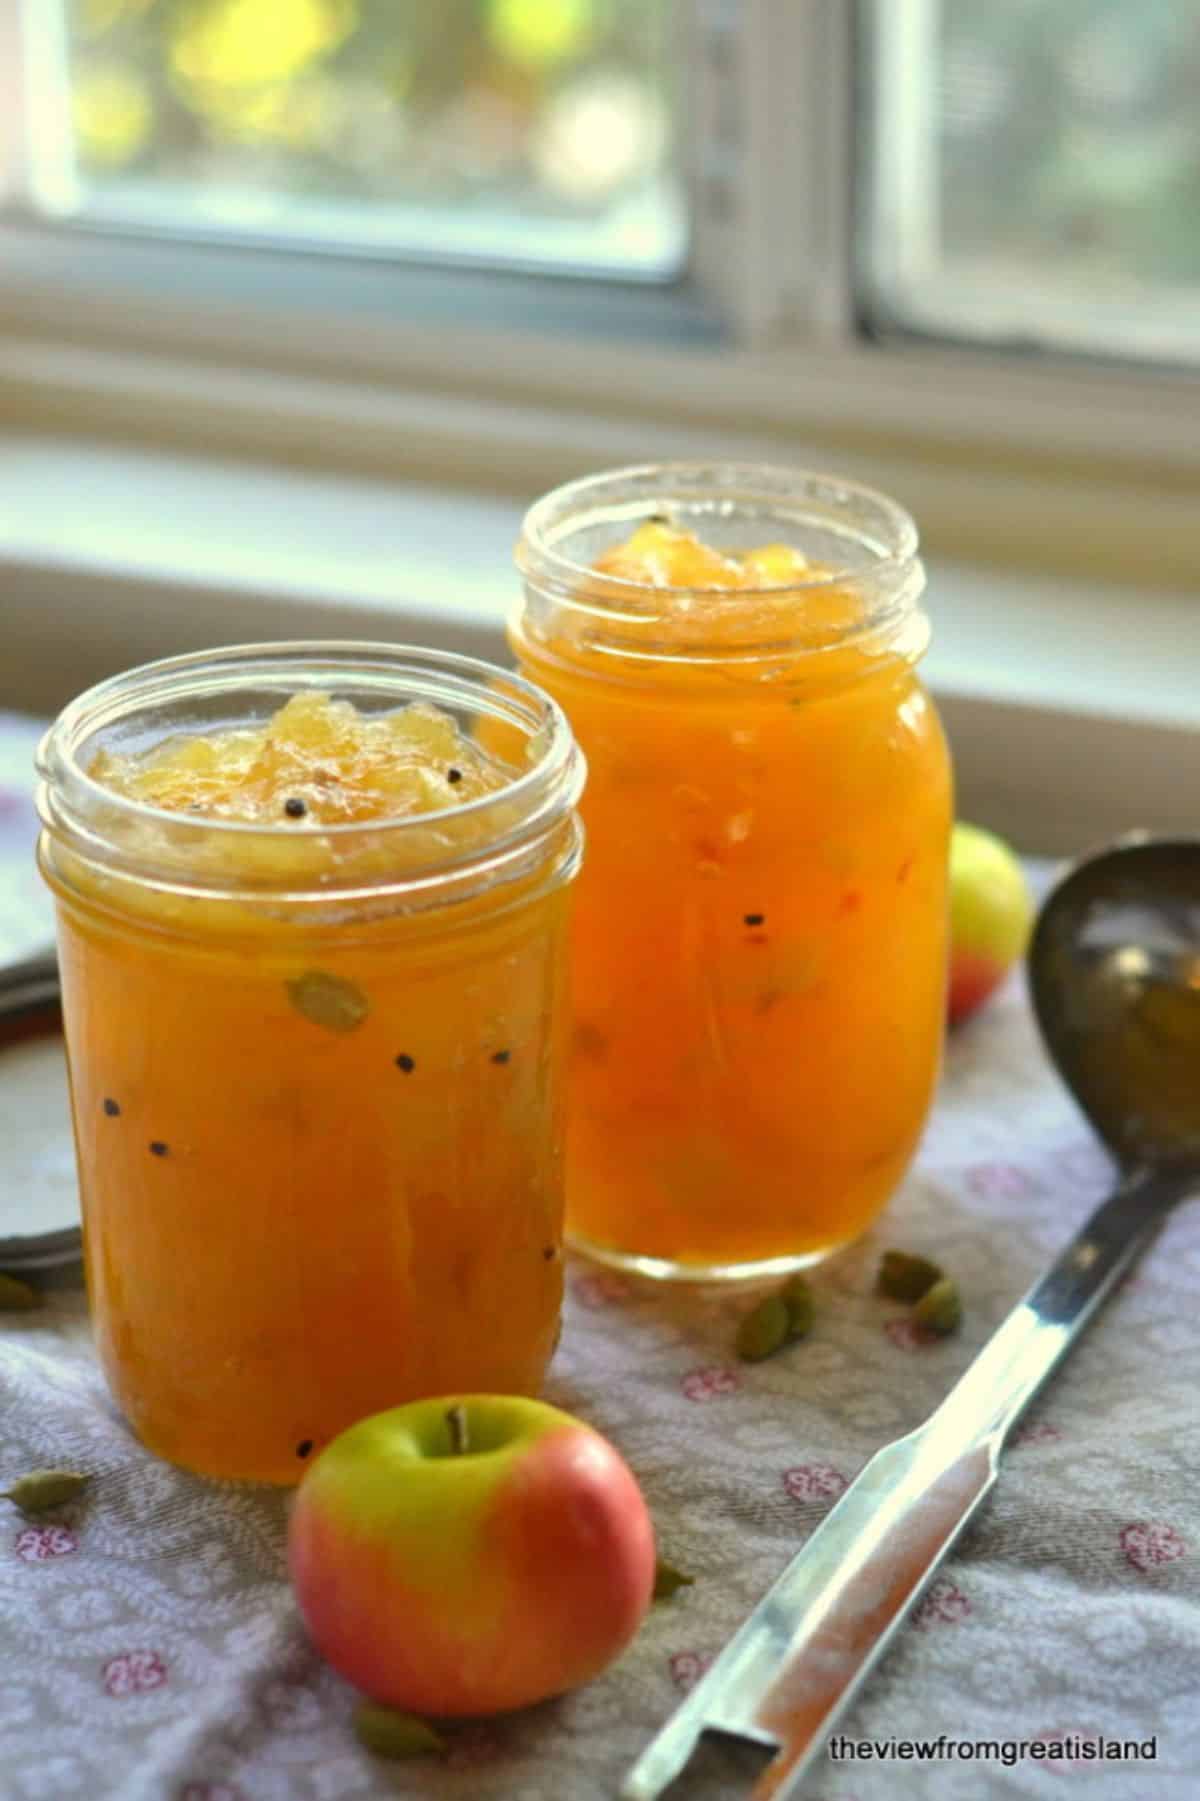 French apple jam with cardamom in two glass jars.